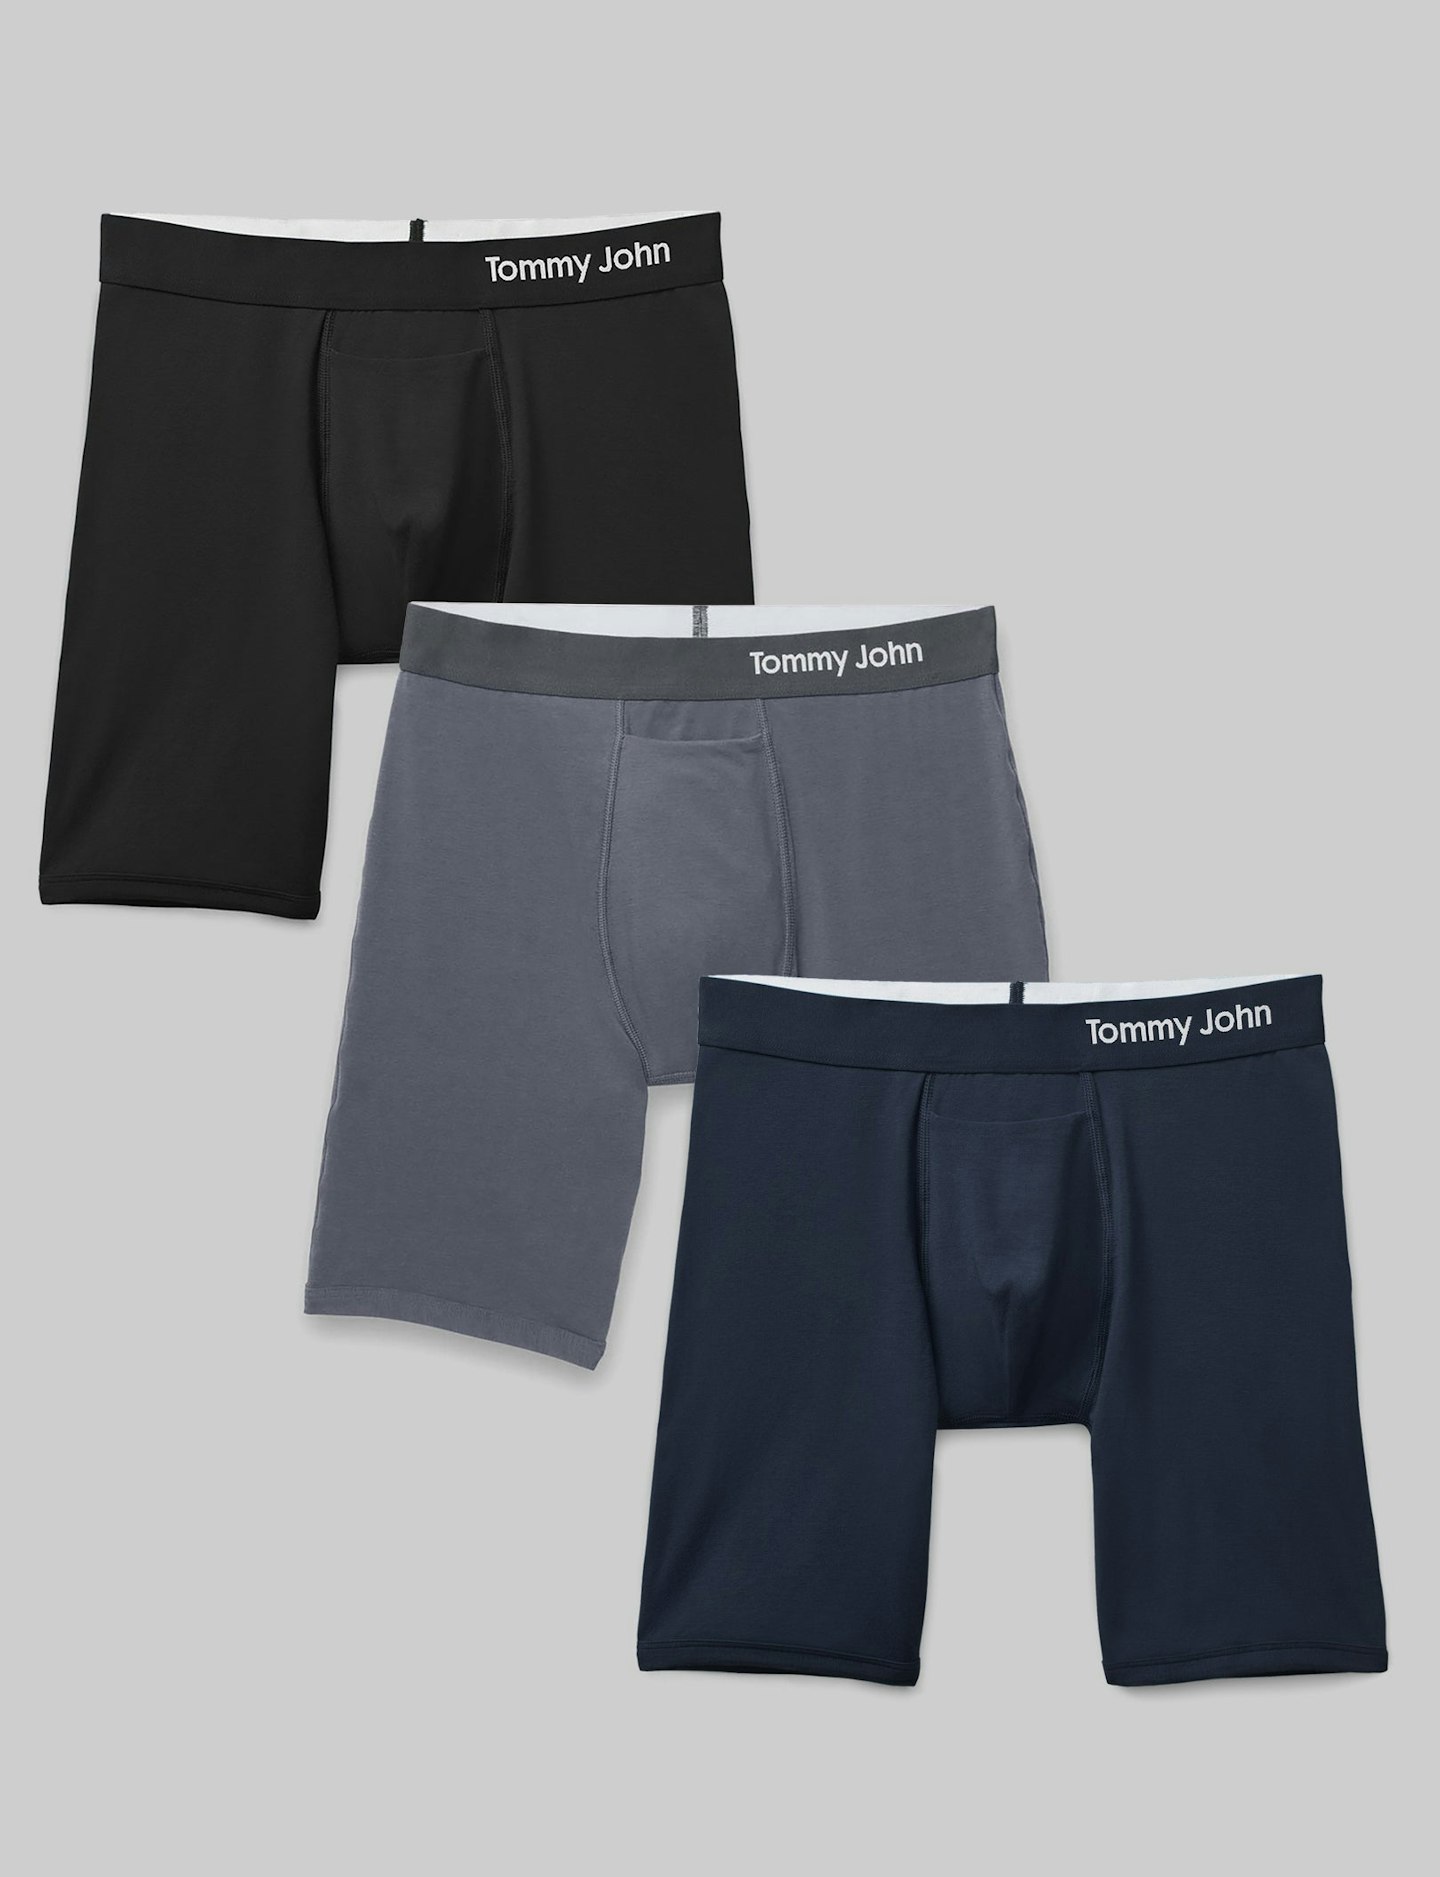 Cool Cotton Boxer Brief 8 (3-Pack) – Tommy John